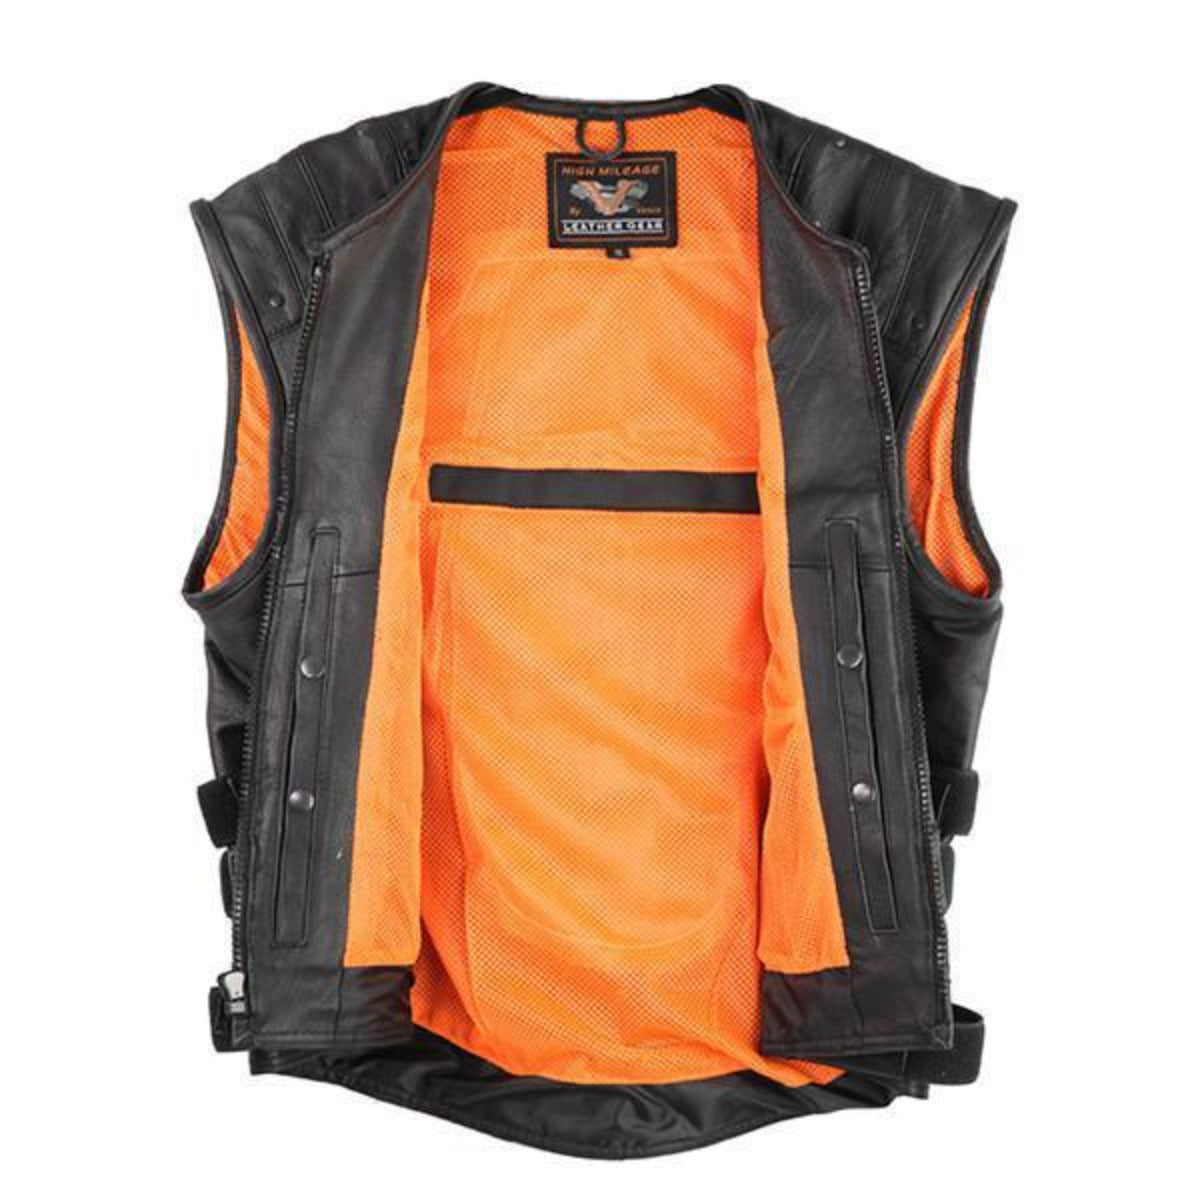 Vance Leather Tactical Bullet Proof Style Naked Cowhide Leather Vest